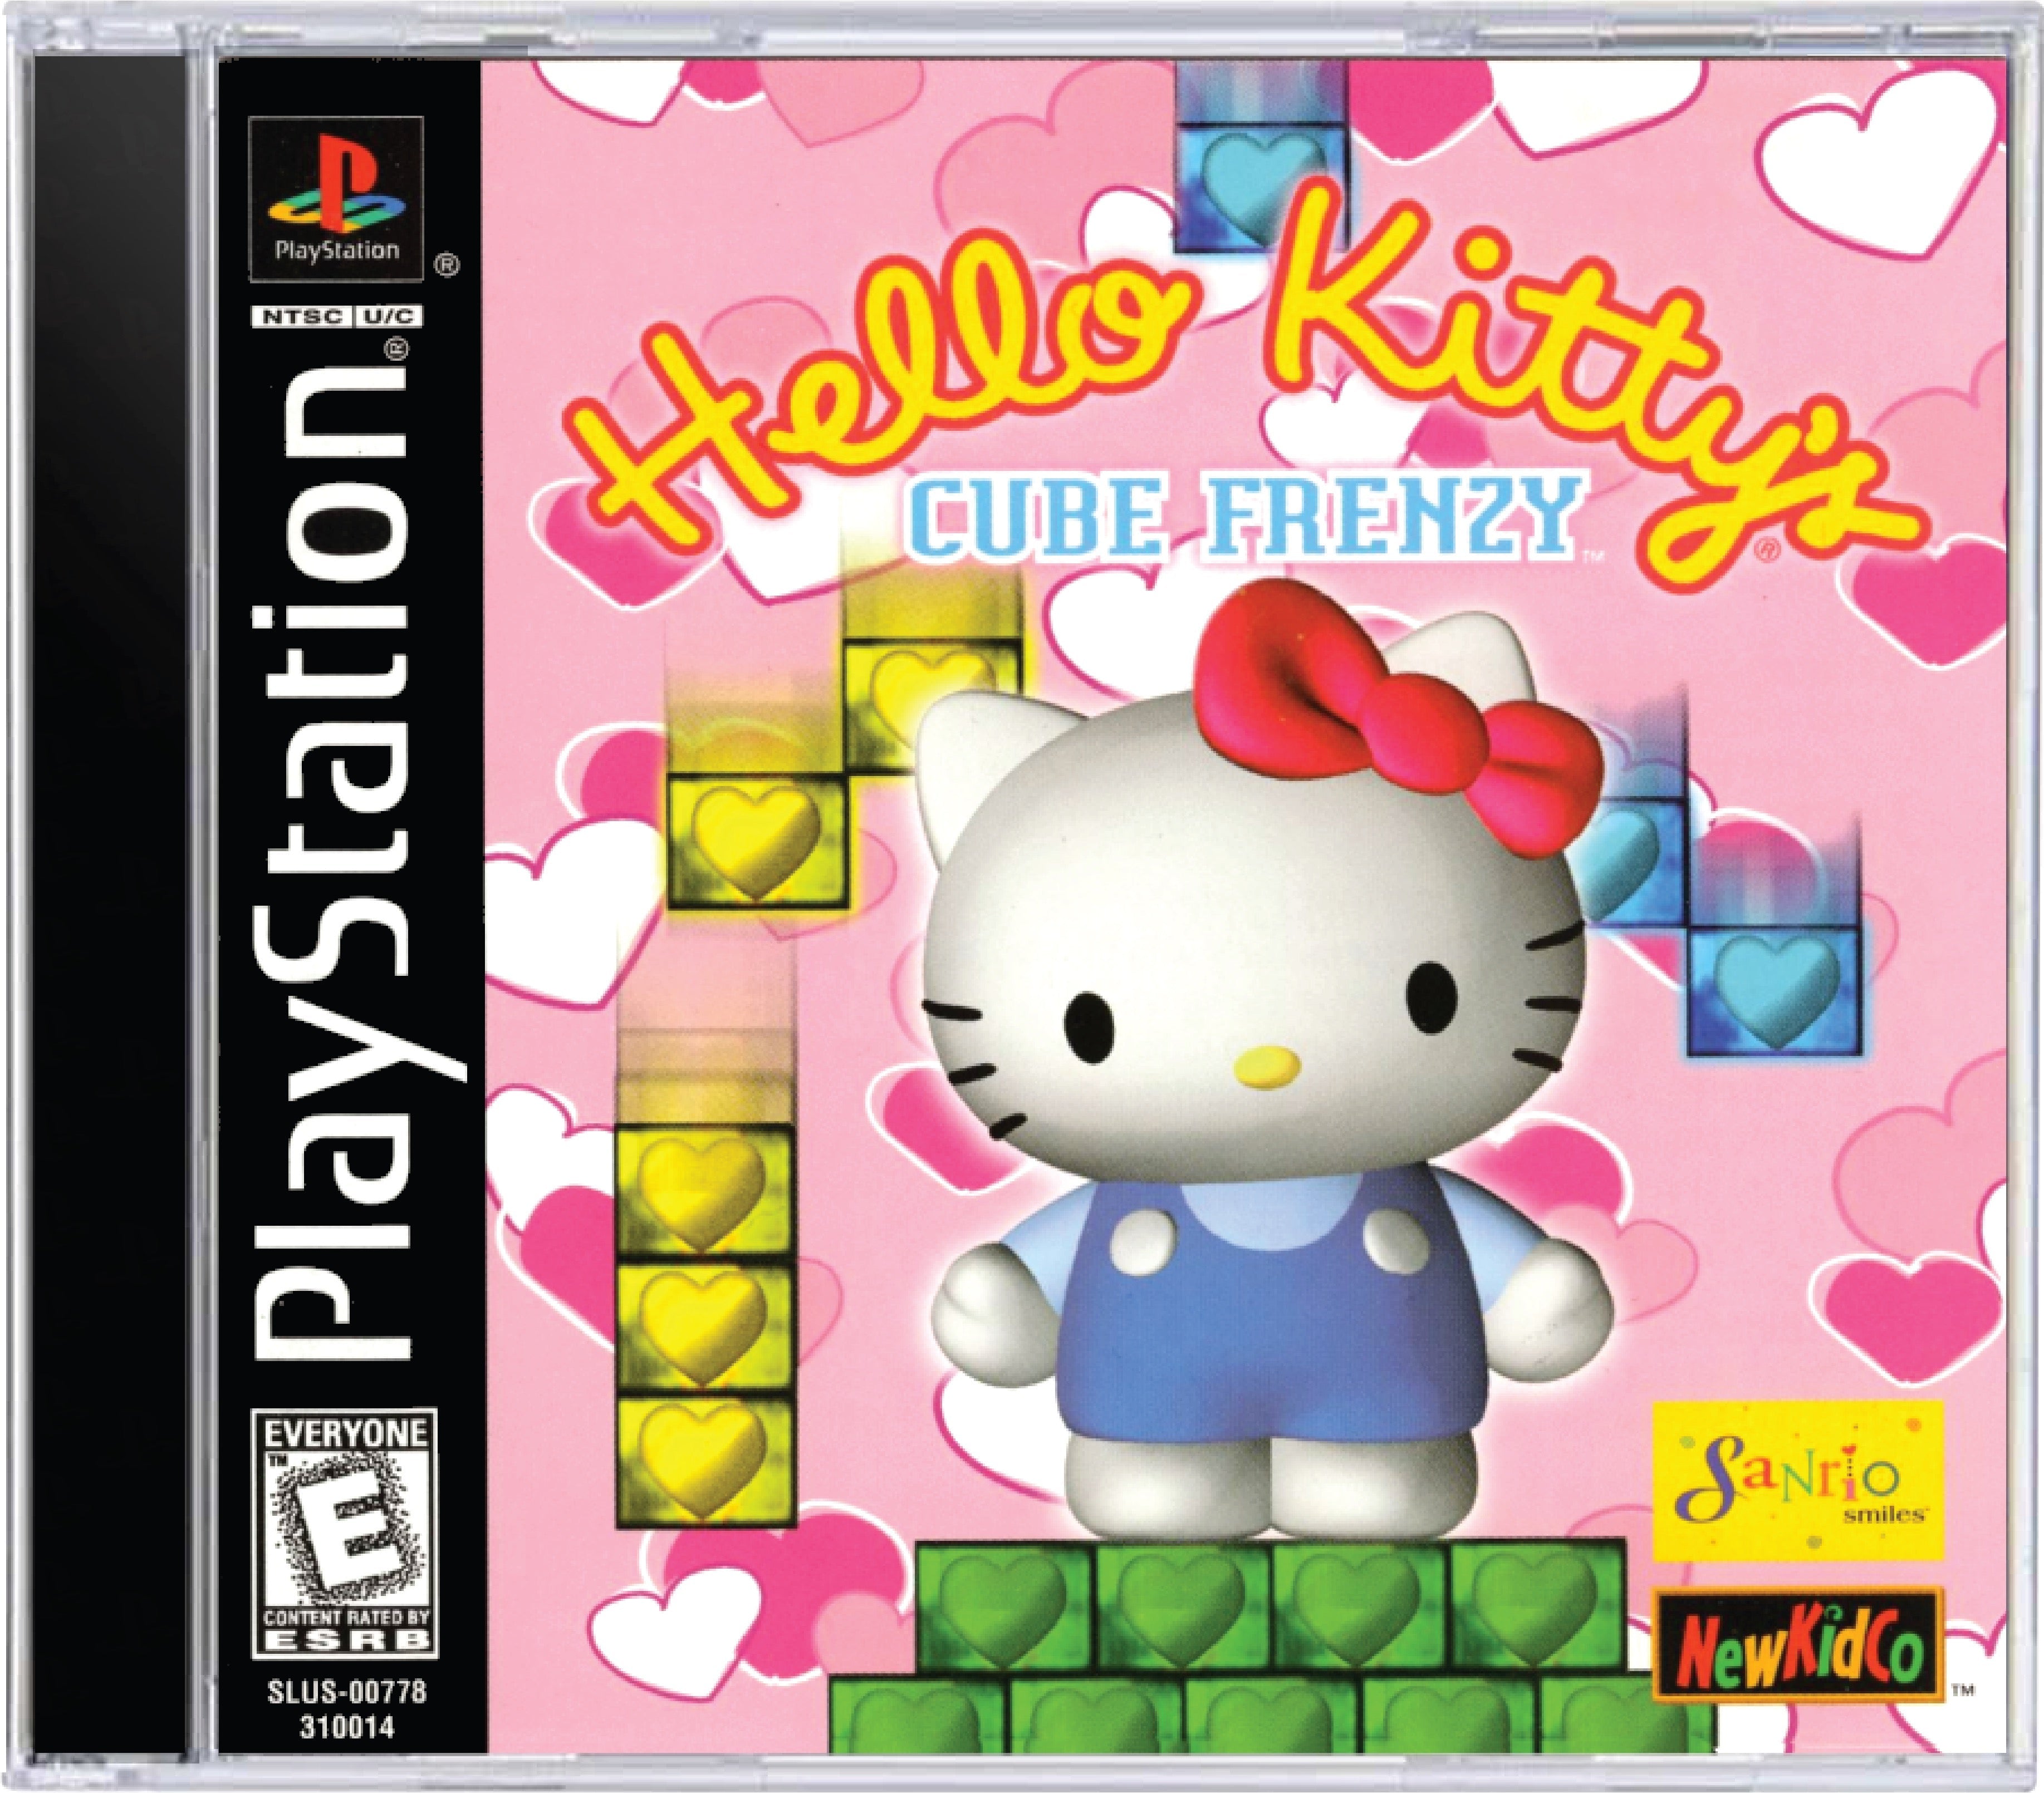 Hello Kitty Cube Frenzy Cover Art and Product Photo